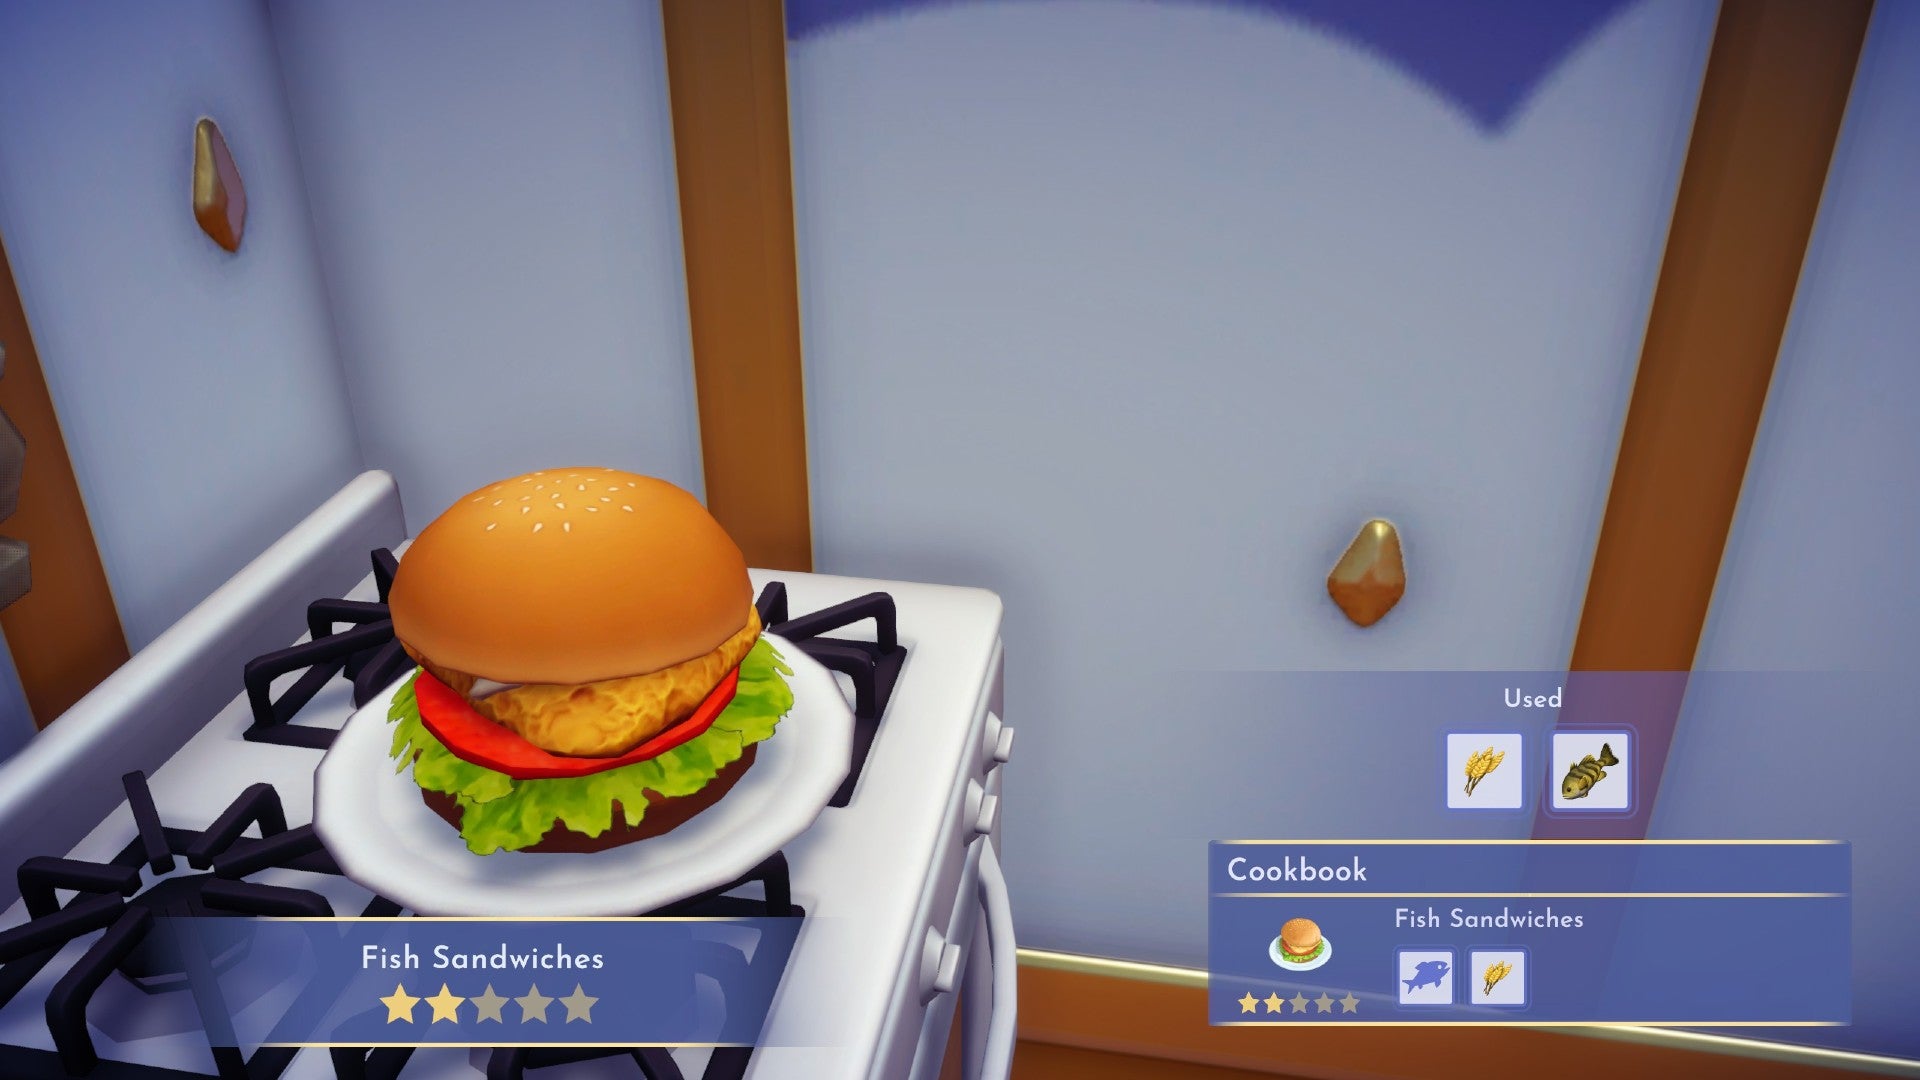 Disney Dreamlight Valley screenshot showing a fish sandwich on the rest, with two stars underneath. On the right, it shows a small picture of wheat and a fish.